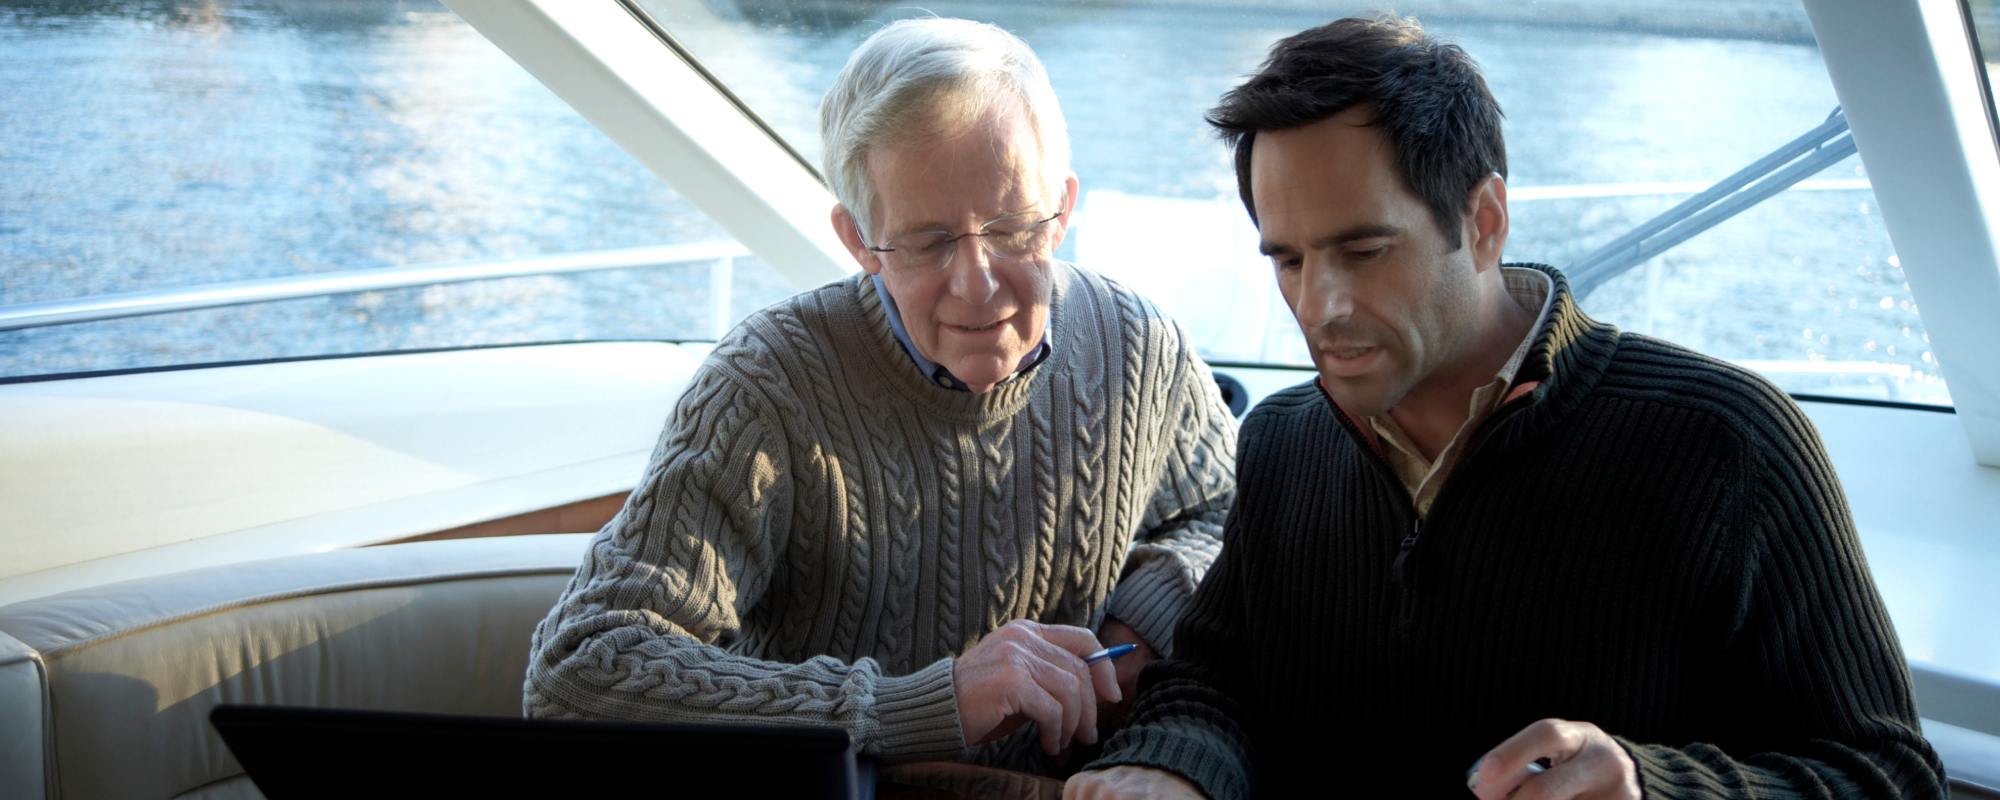 Man and his father on a boat reviewing documents